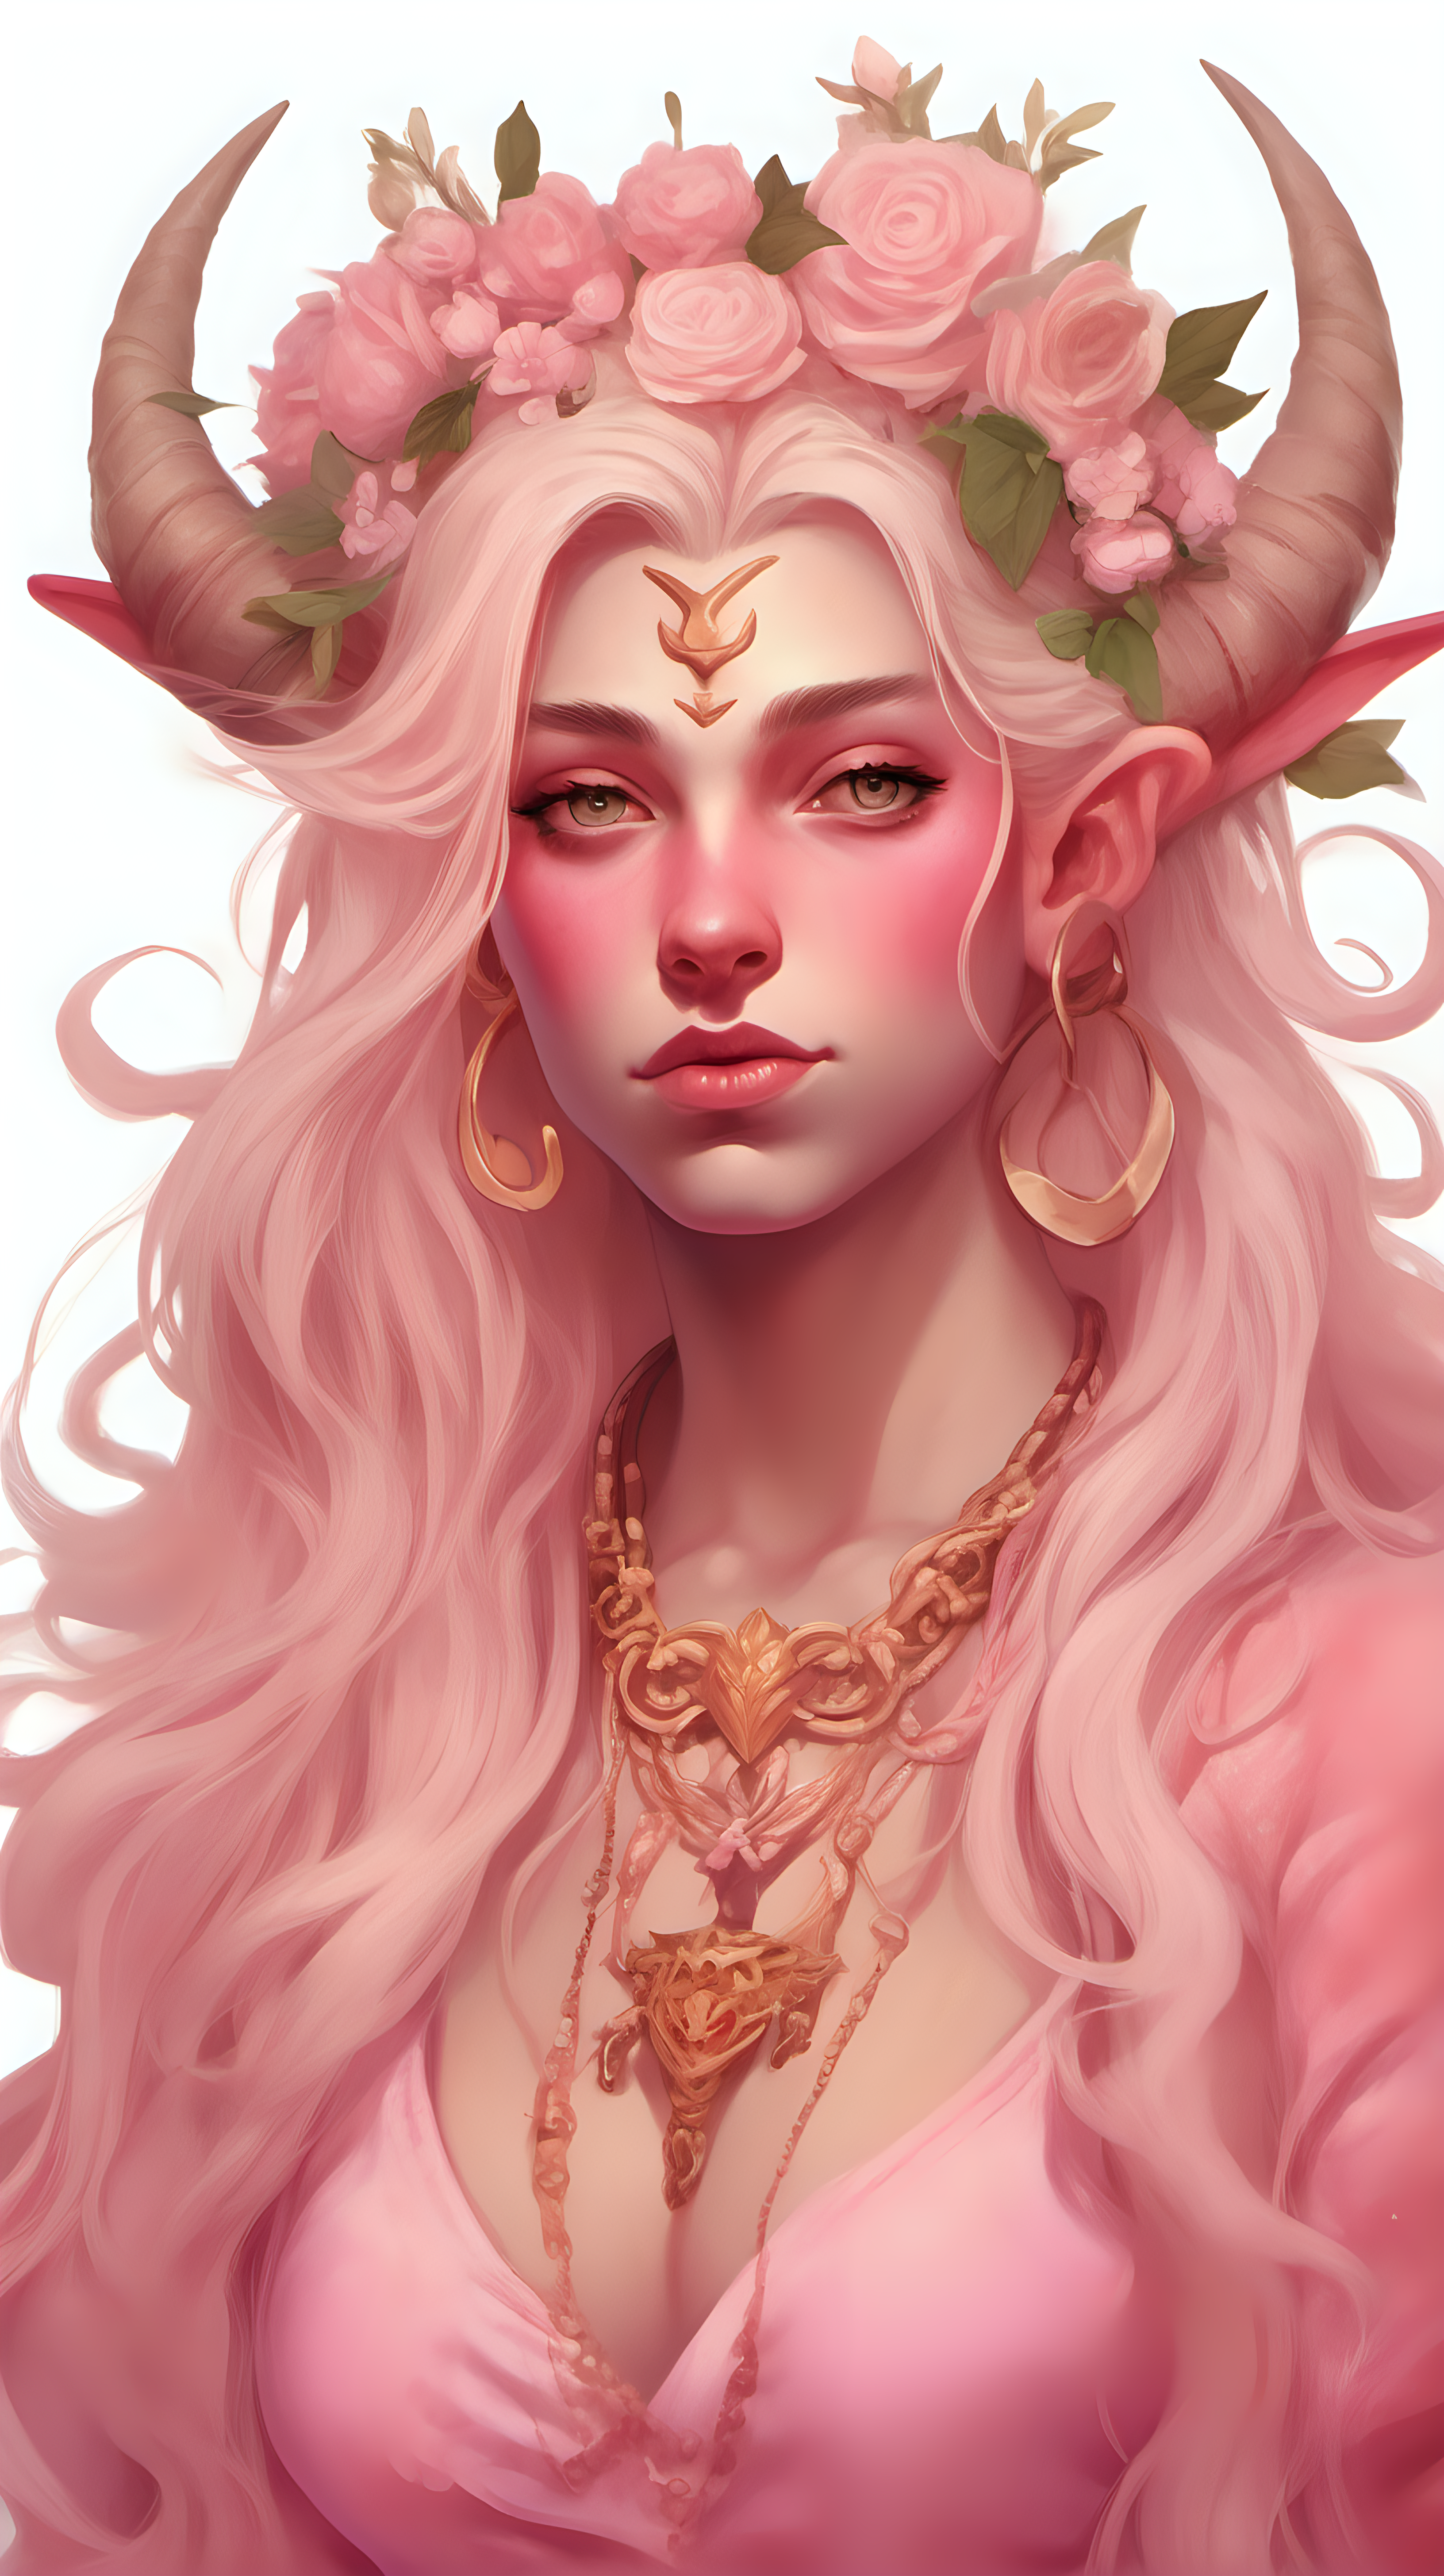 Tiefling woman with pink skin She has white